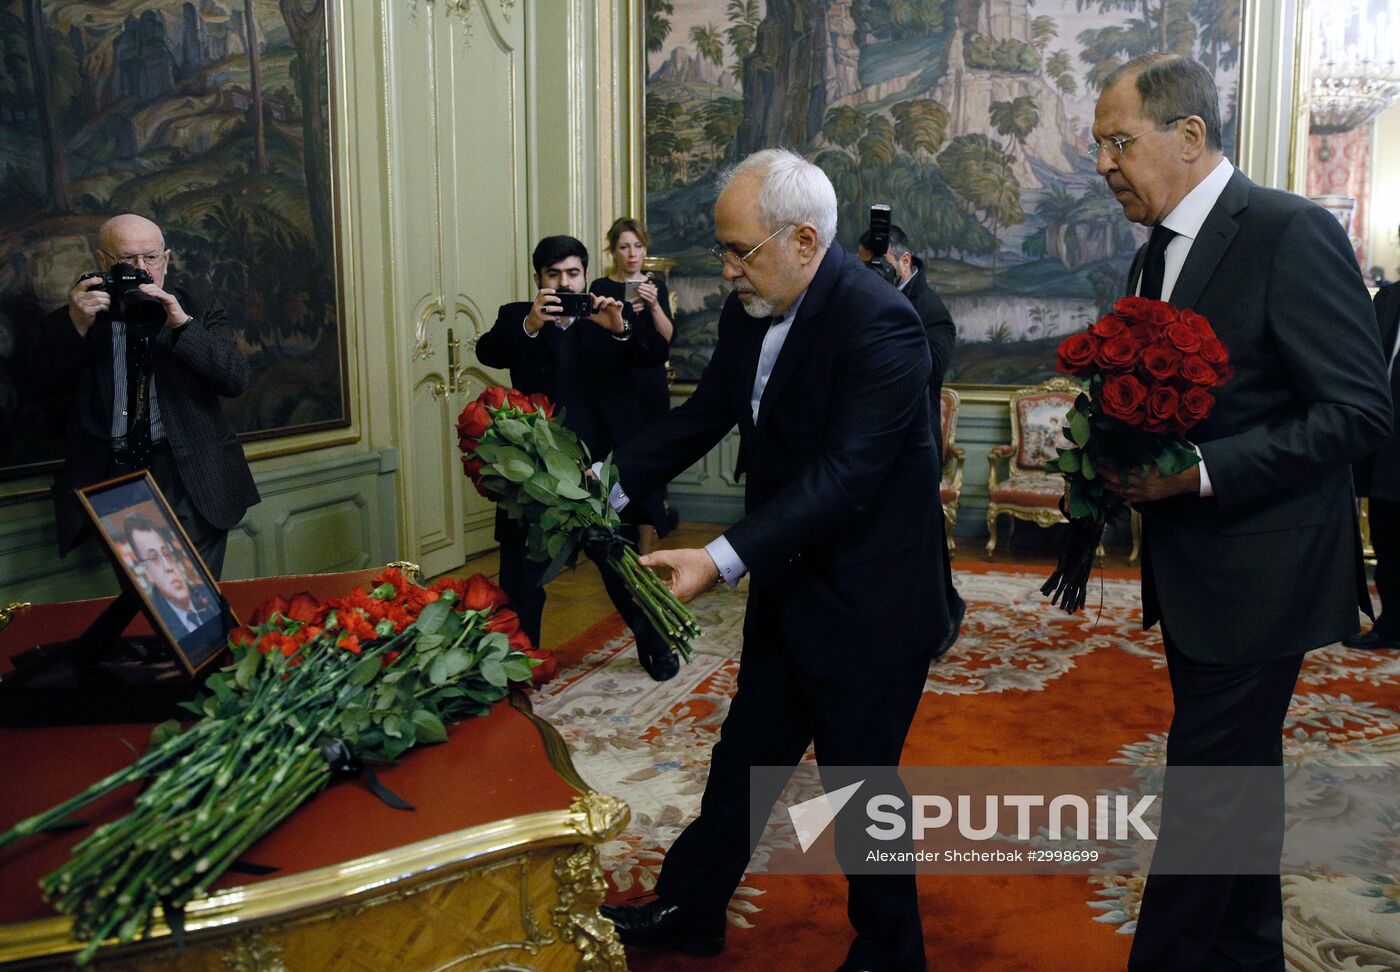 Foreign ministers of Russia, Iran, Turkey lay flowers in memory of Ambassador Andrei Karlov